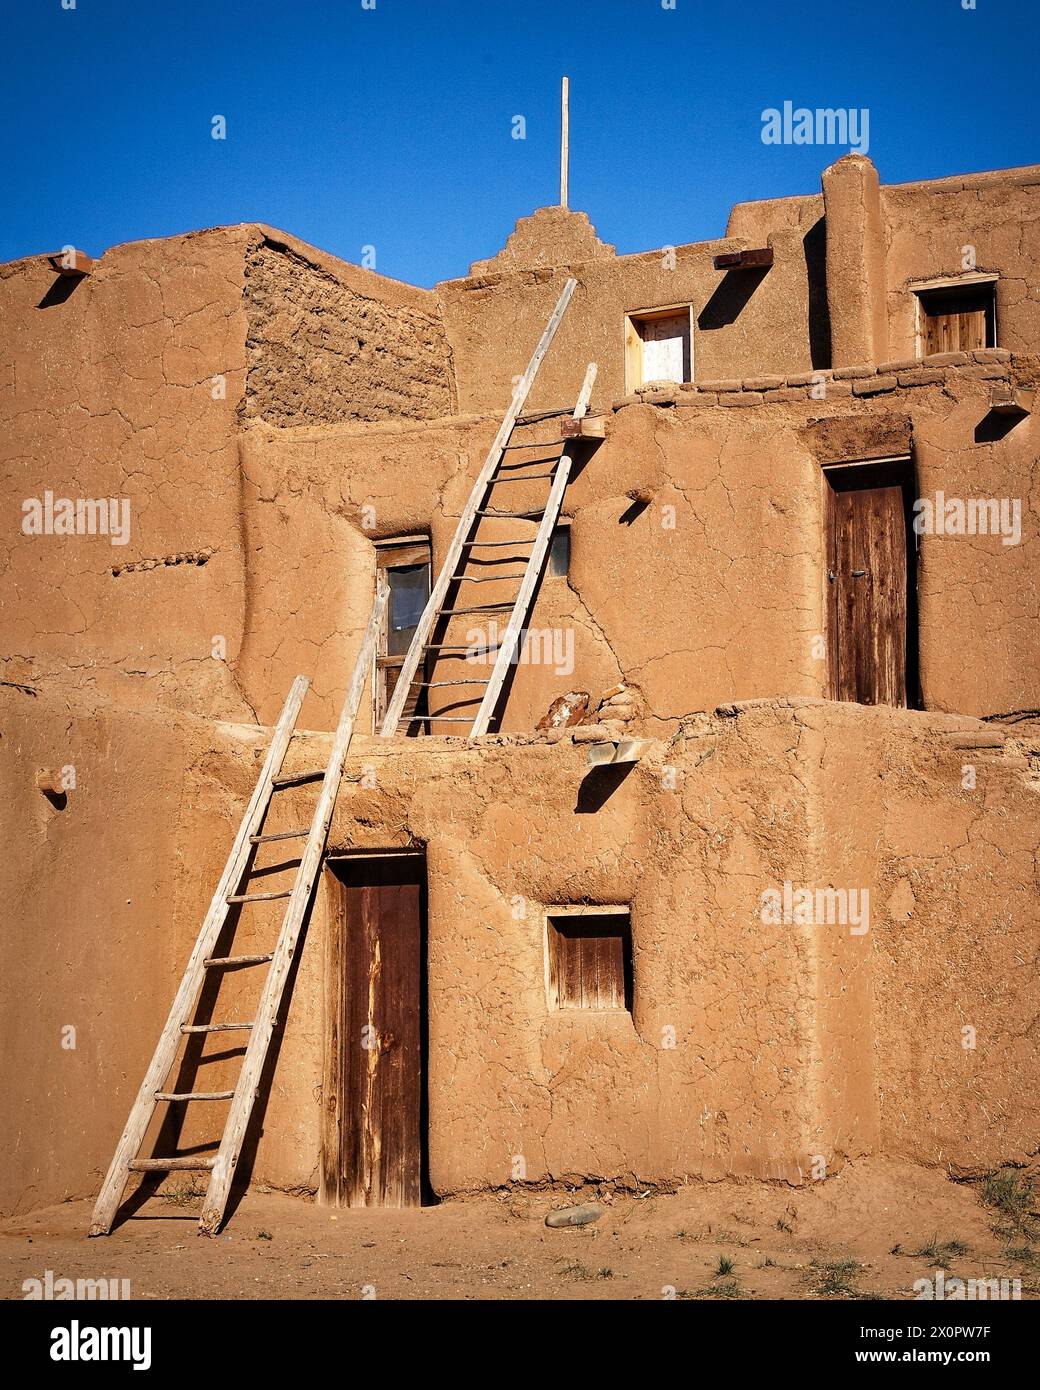 The rising adobe levels of the historic Taos Pueblo in Taos, New Mexico. Stock Photo